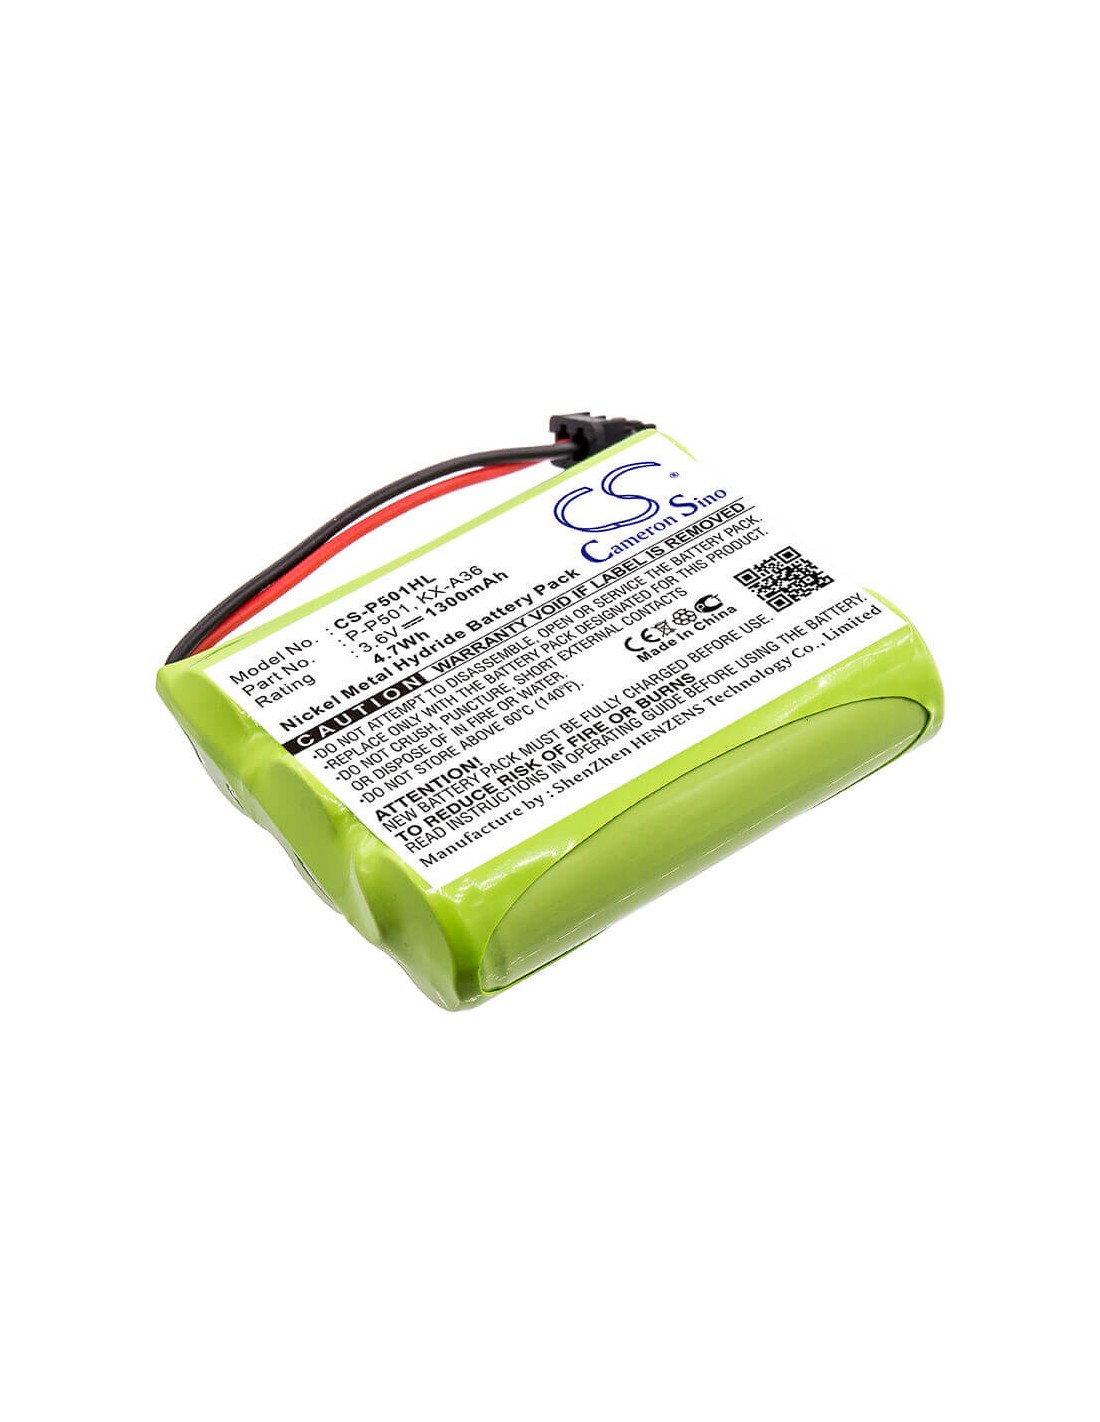 Battery for Sanyo, 23621, 3n-600aa(mtm), Cl-100w, Cl-200, 3.6V, 1300mAh - 4.68Wh